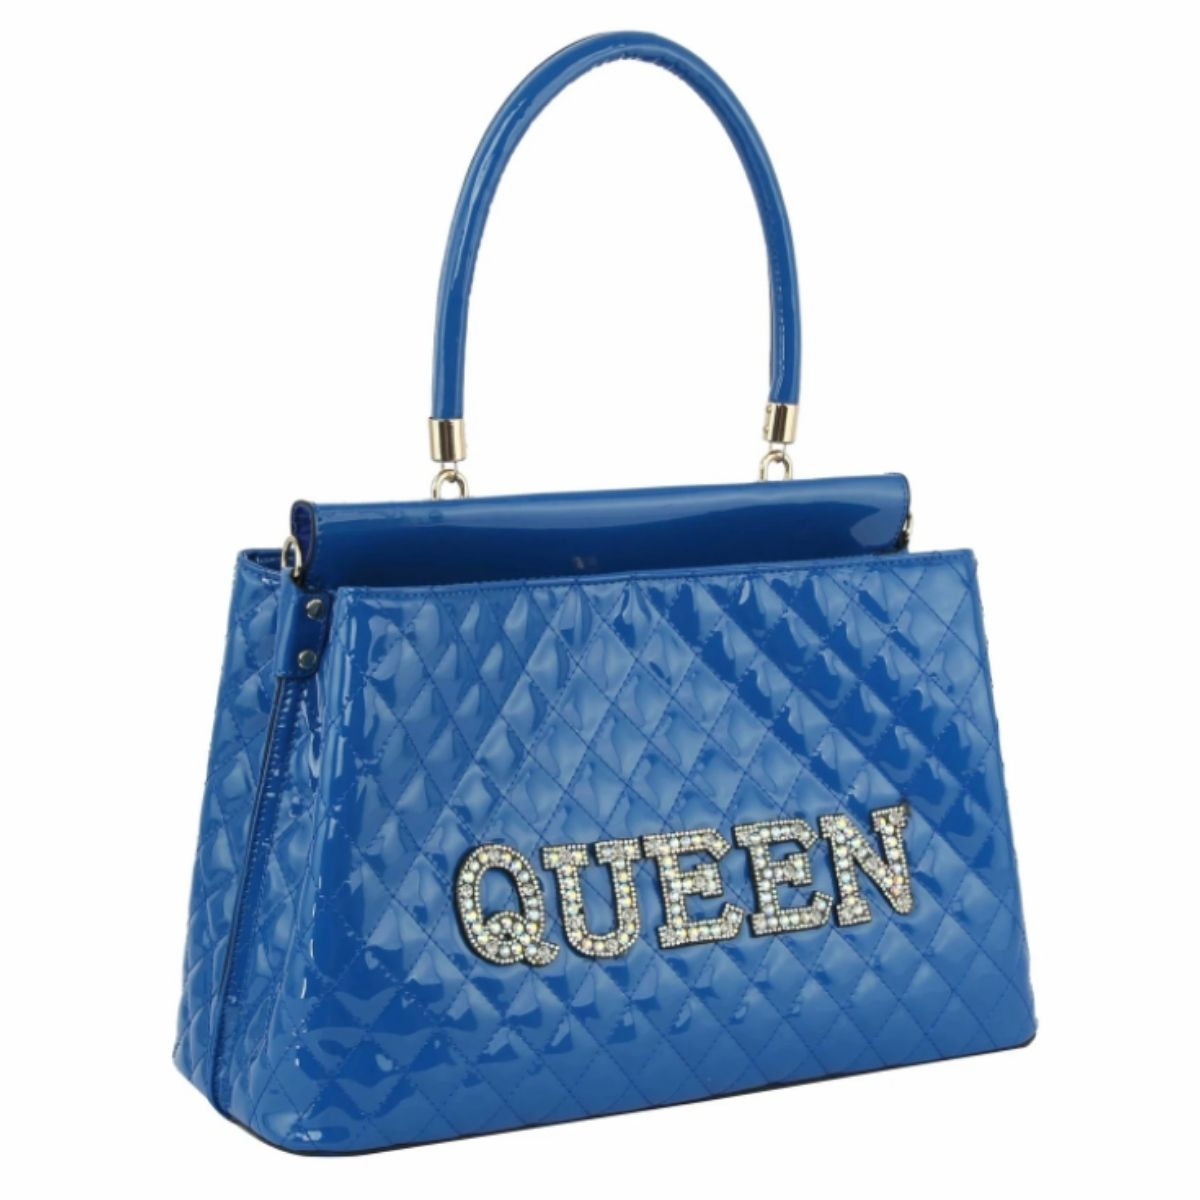 Blue Quilted Queen Tote Handbag